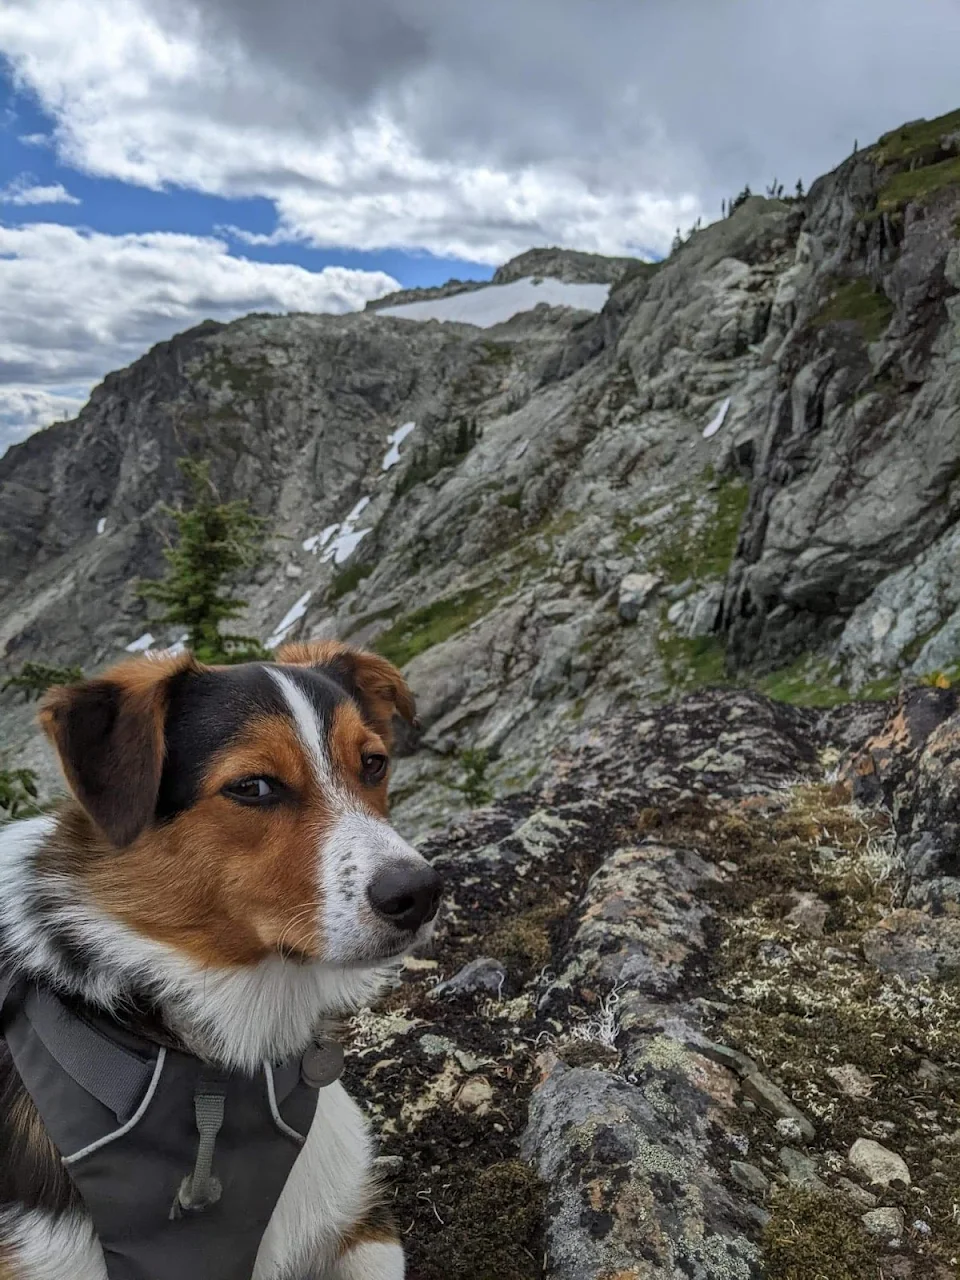 My friend's dog was suspicious of the hike